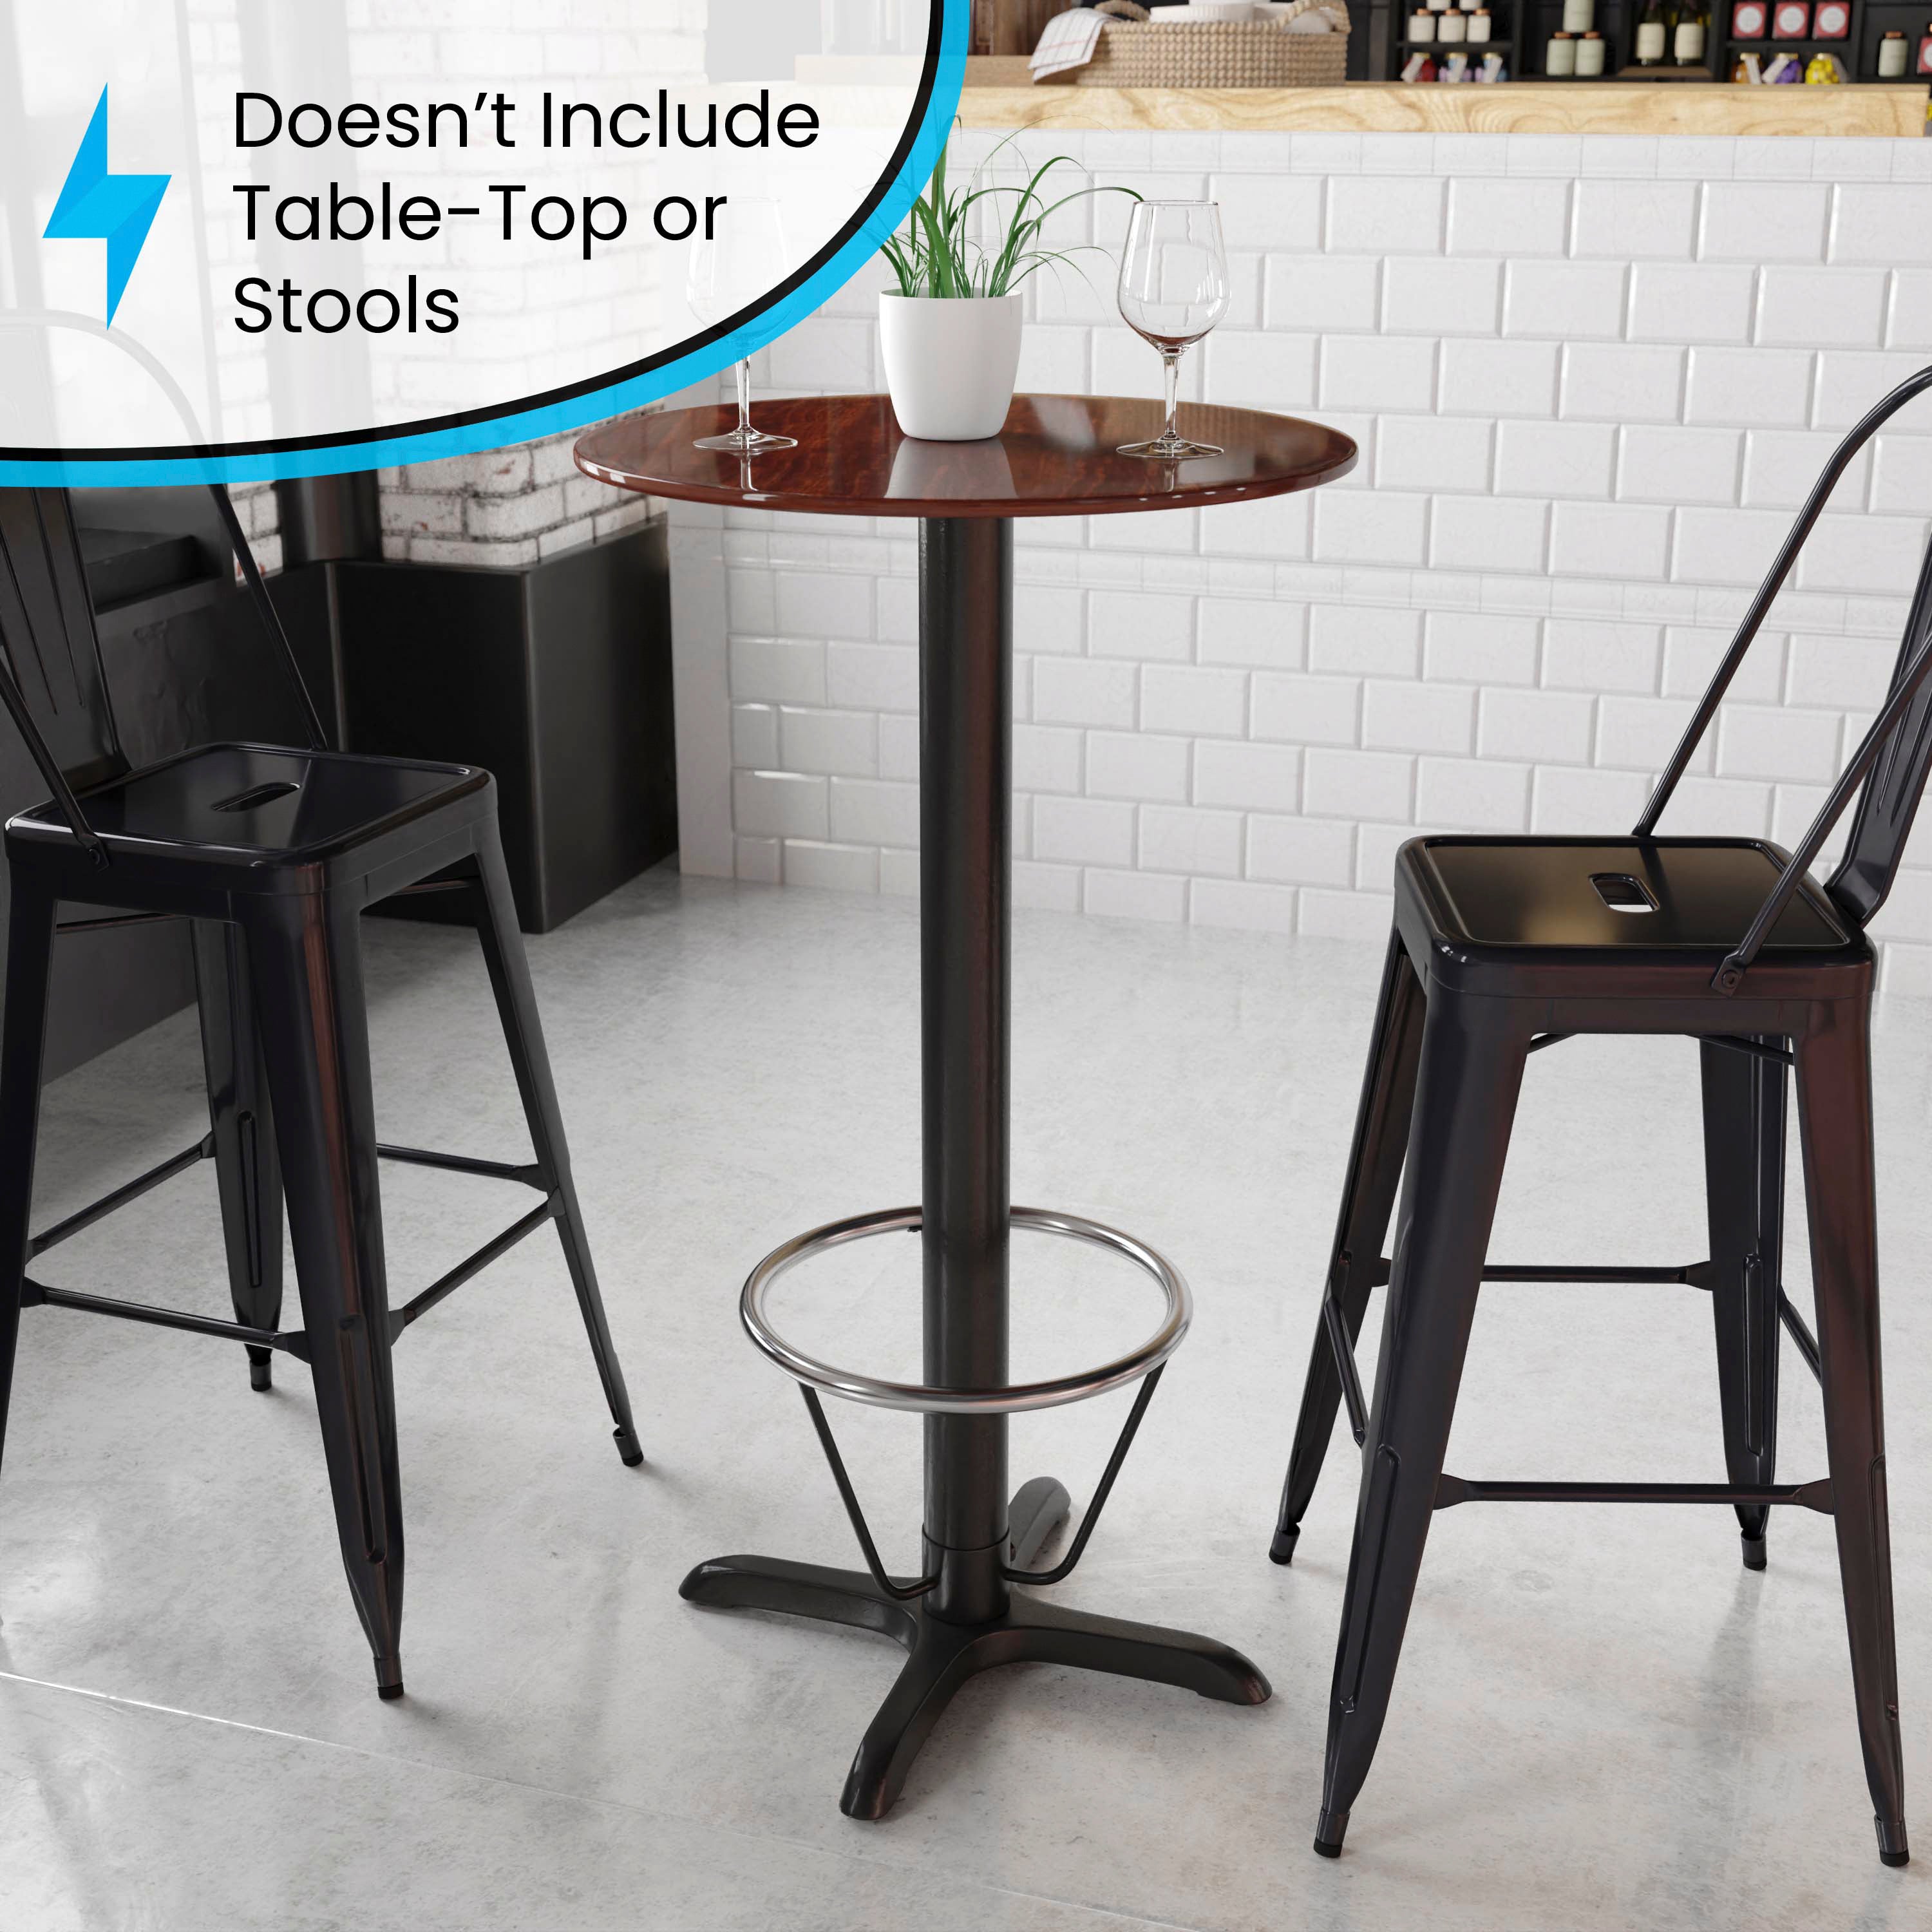 22'' x 22'' Restaurant Table X-Base with 3'' Dia. Bar Height Column and Foot Ring-Restaurant Bar Table Bases-Flash Furniture-Wall2Wall Furnishings